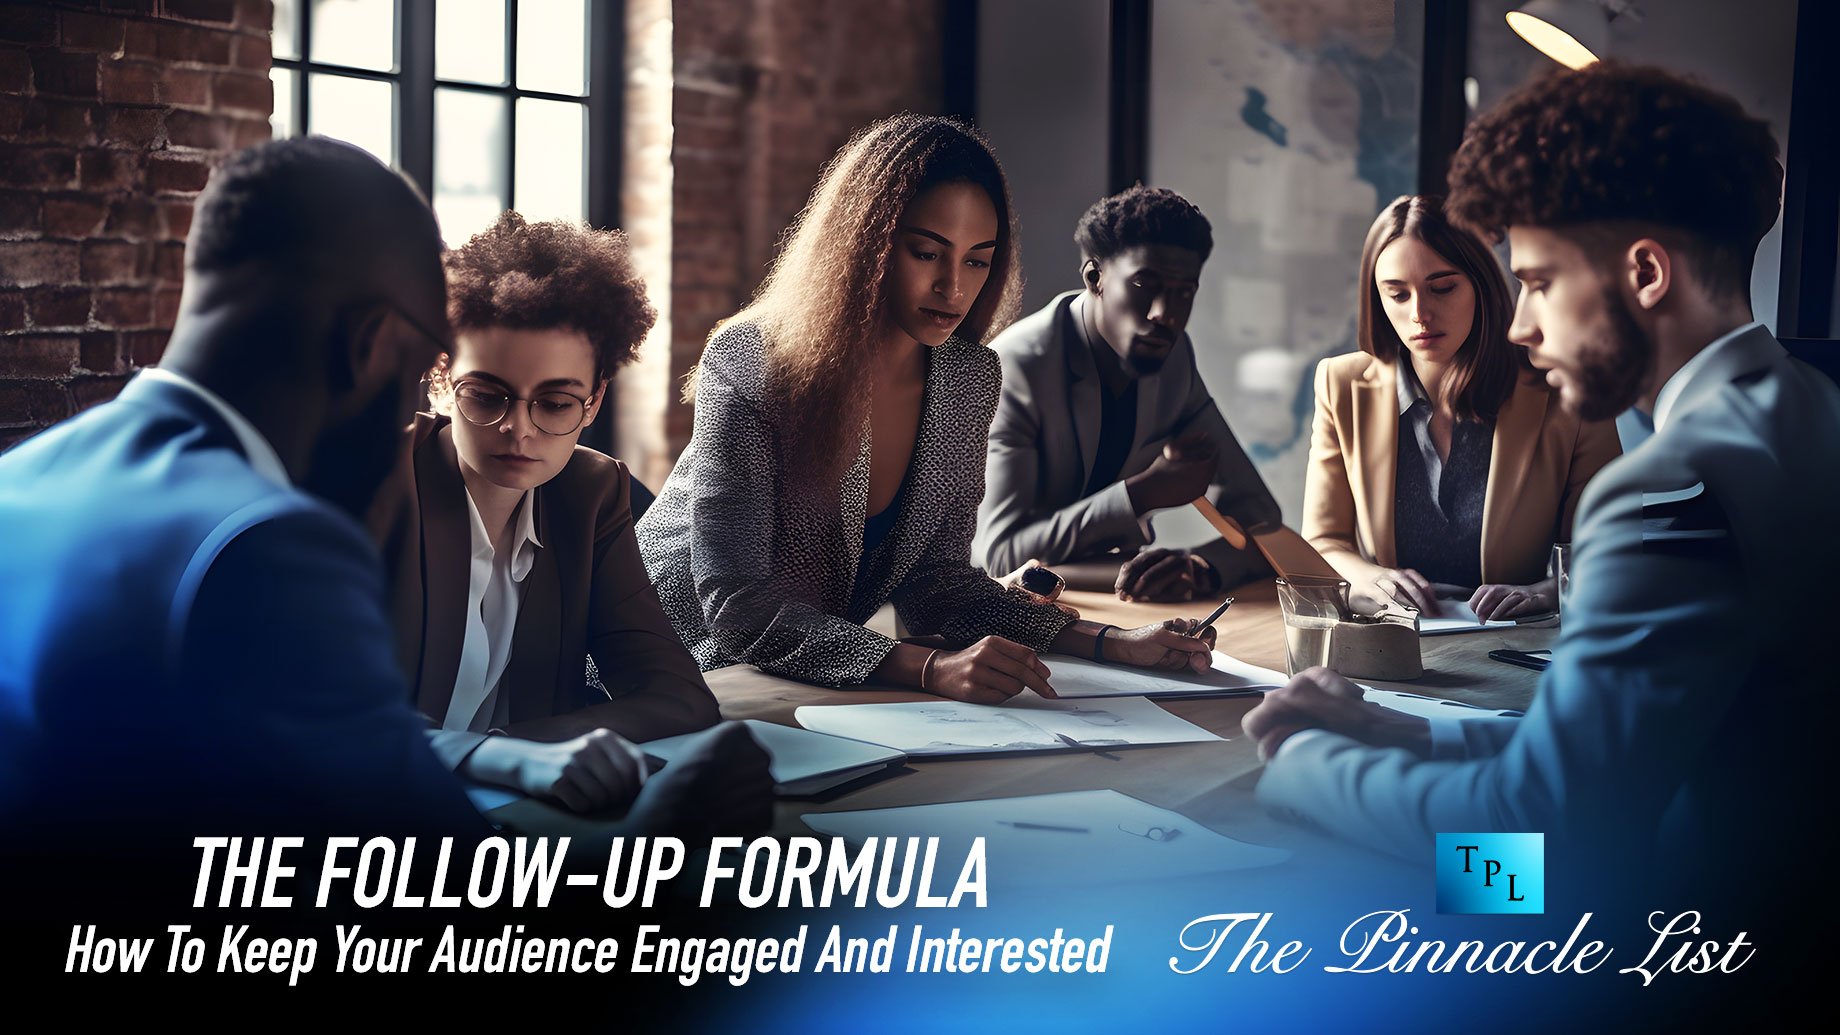 The Follow-Up Formula: How To Keep Your Audience Engaged And Interested